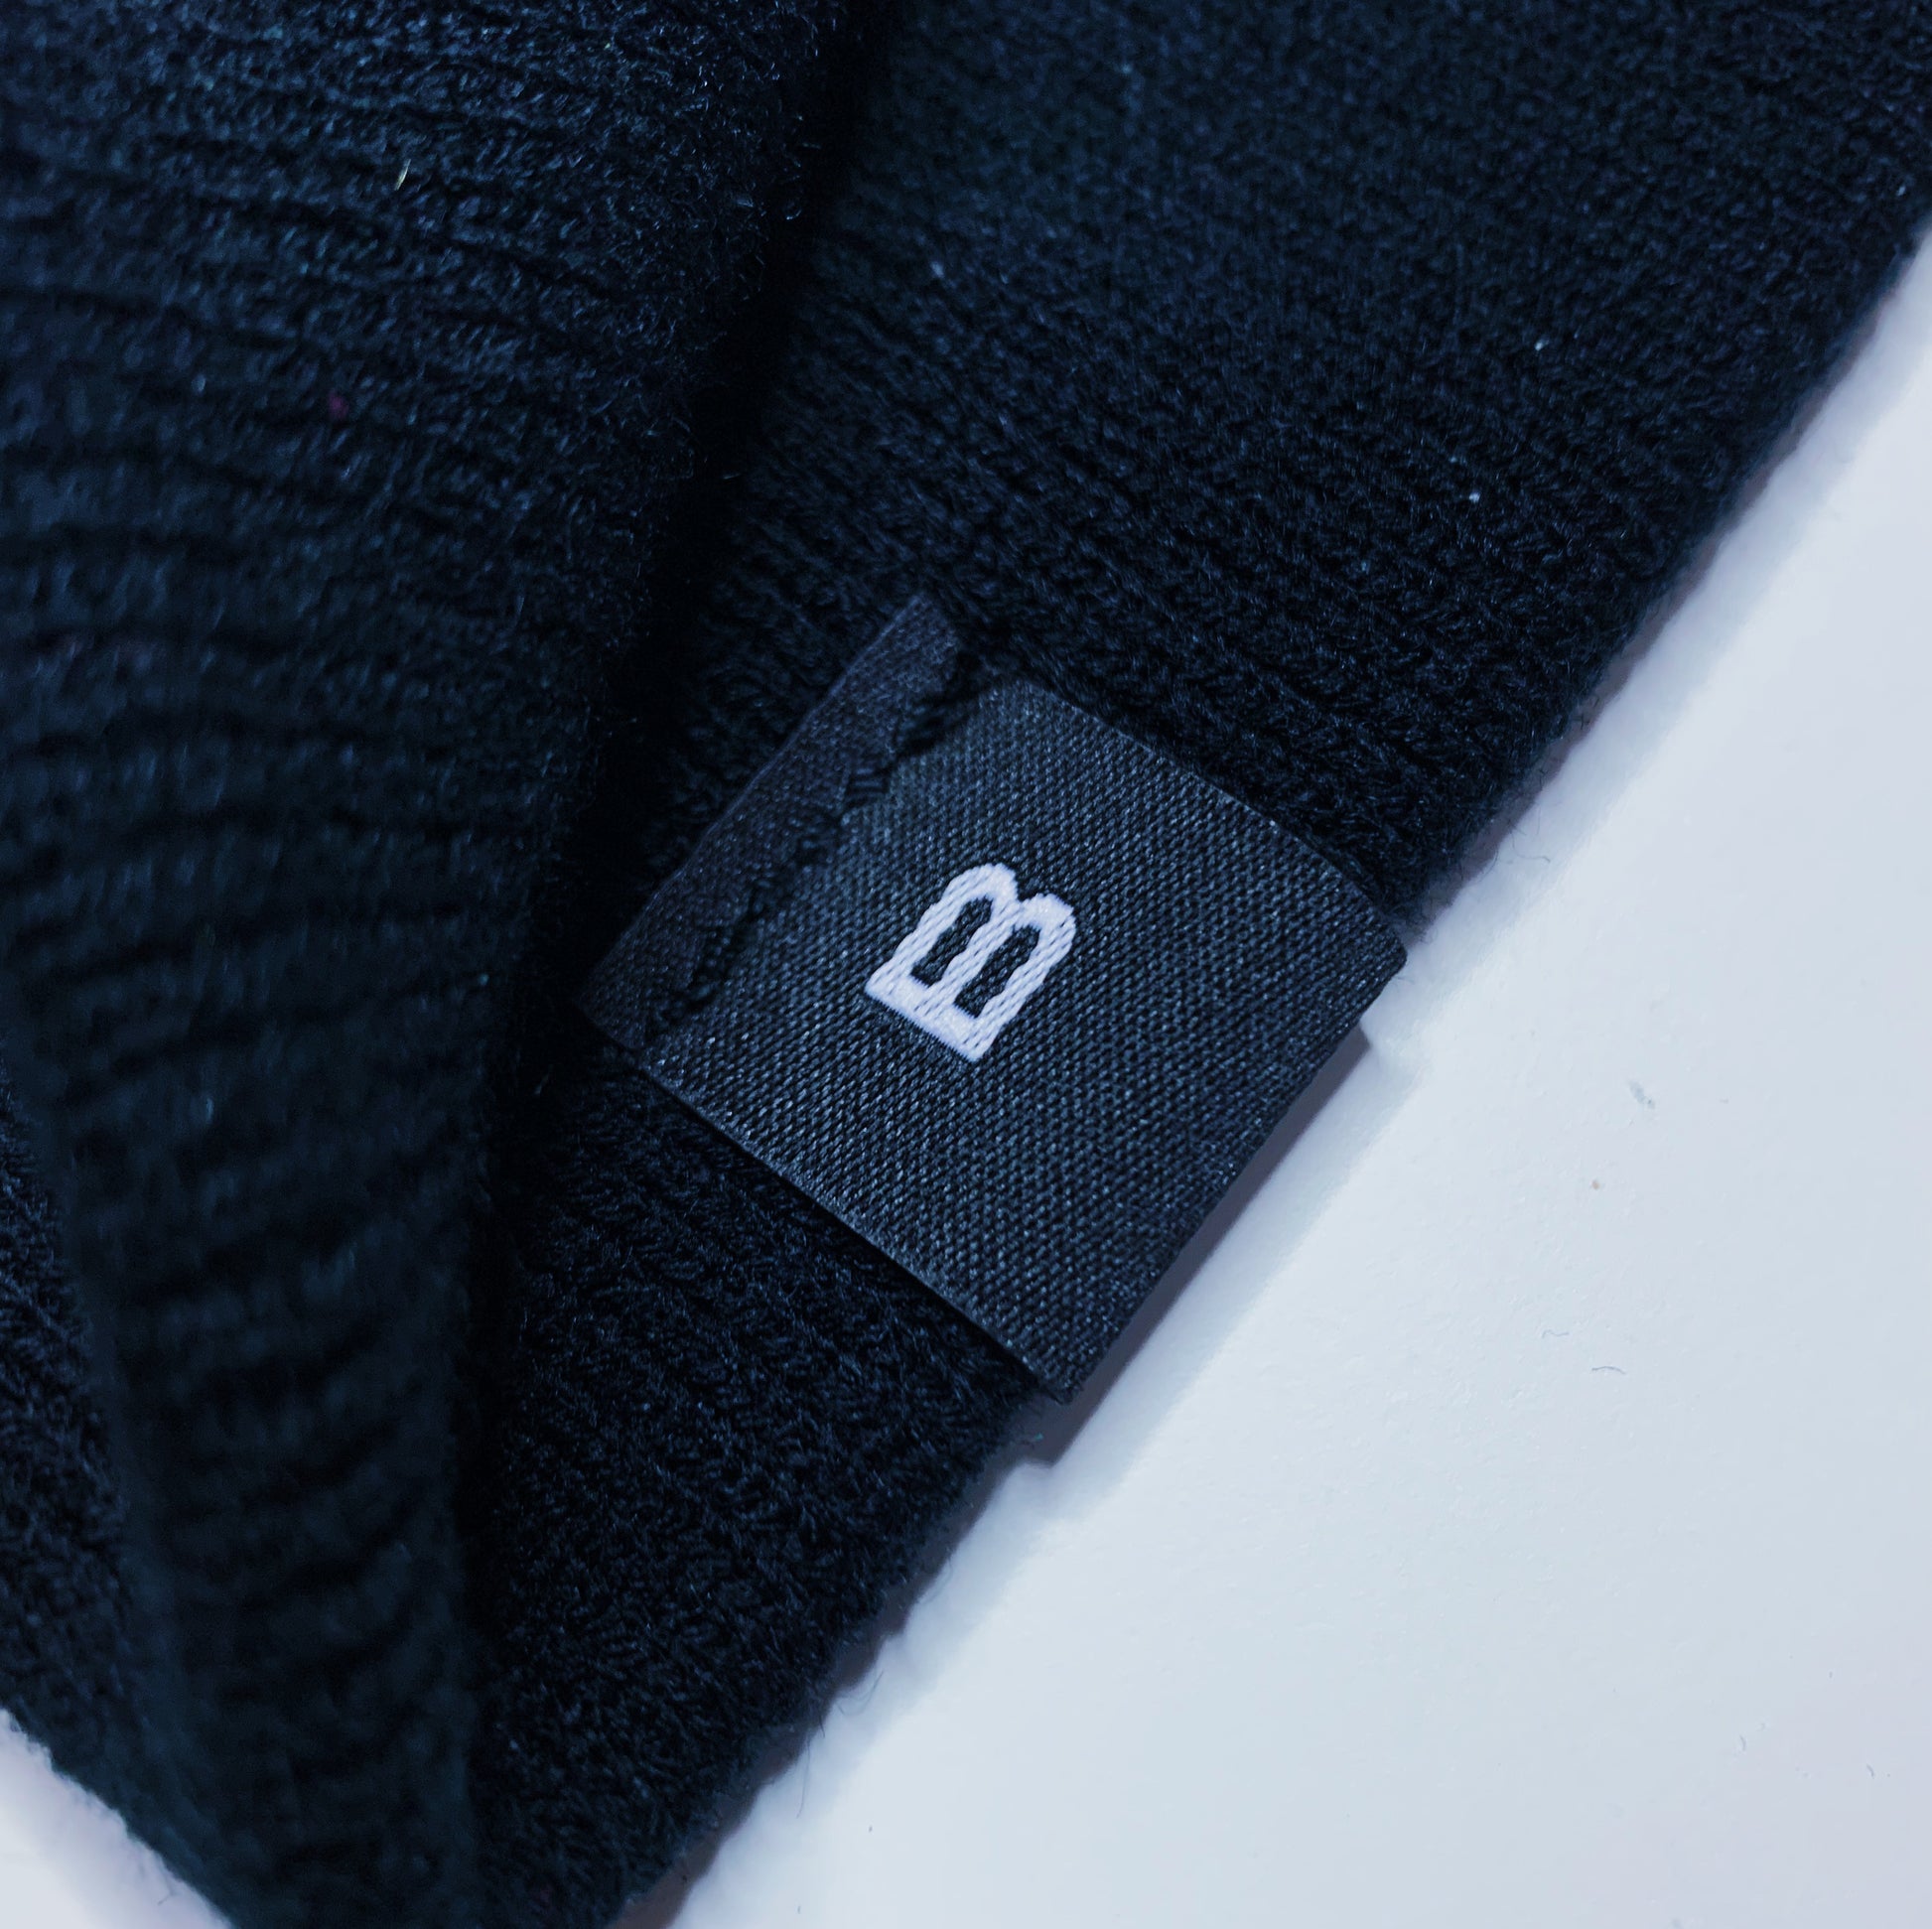 Classic woven tag Bomber beanie (Black)